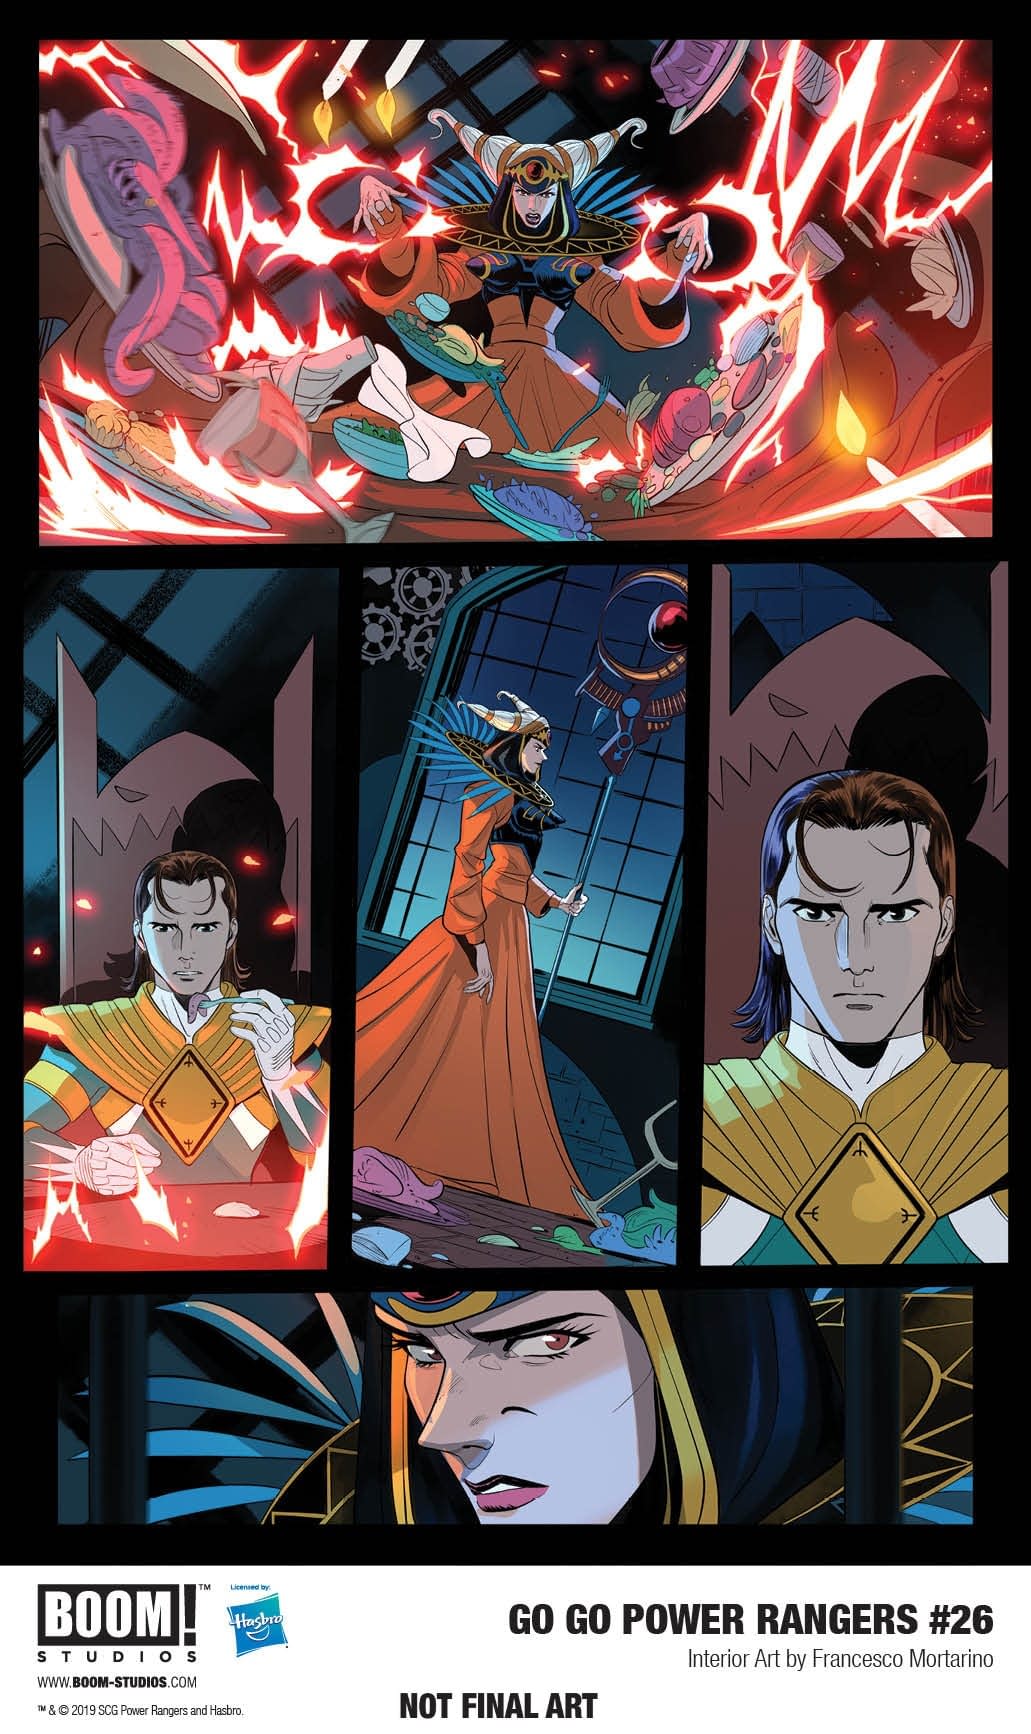 3 Pages from December's Go Go Power Rangers #36